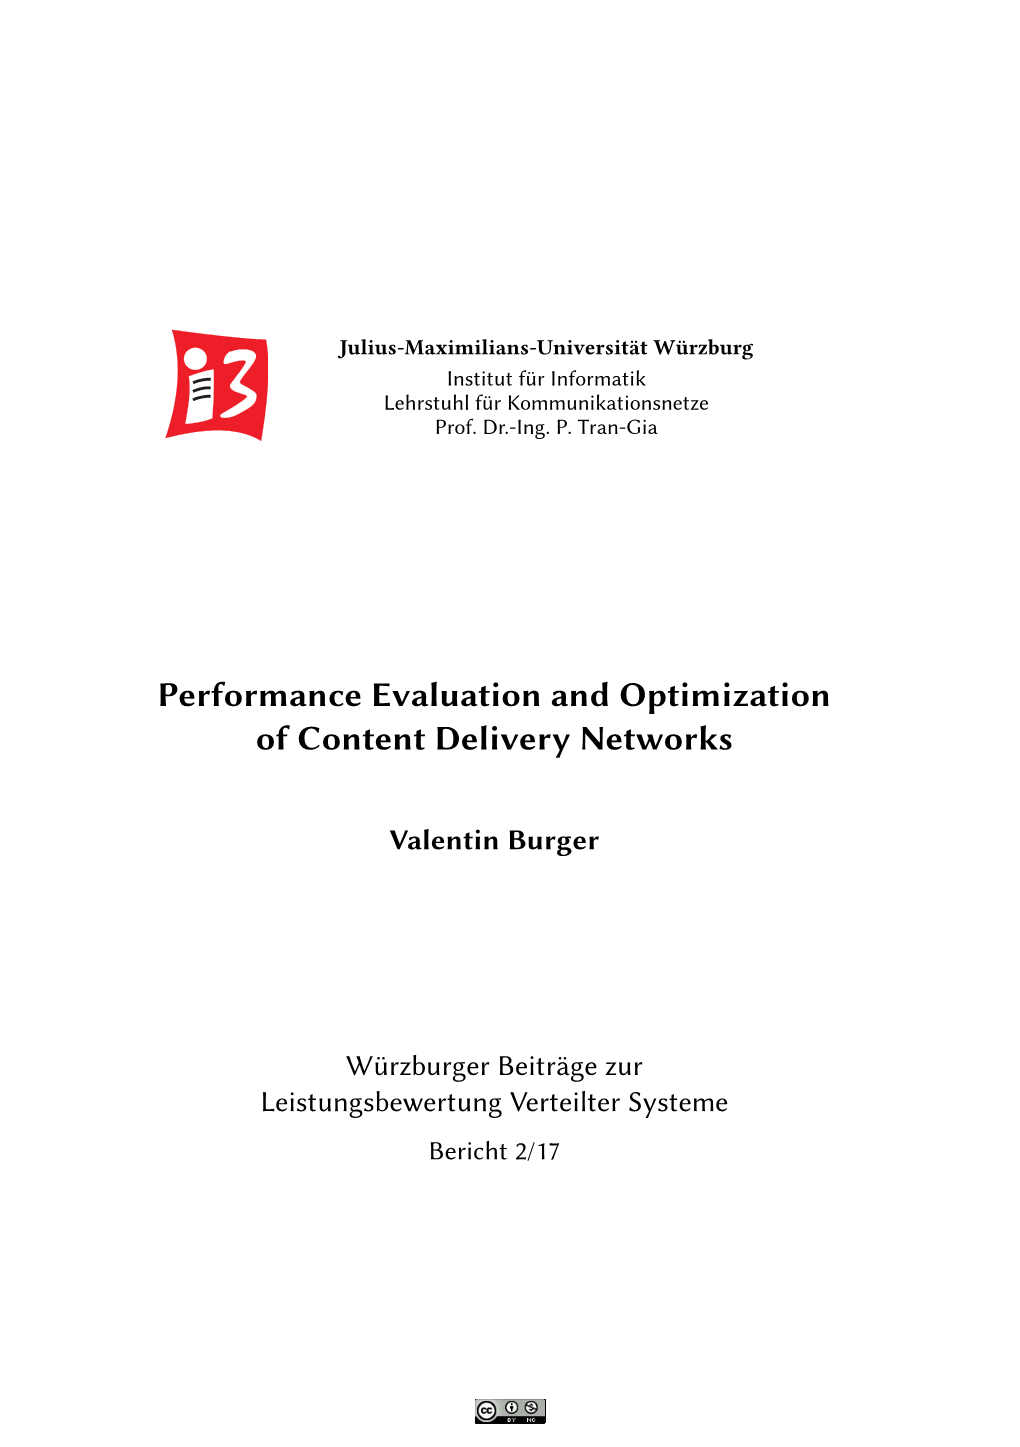 Performance Evaluation and Optimization of Content Delivery Networks